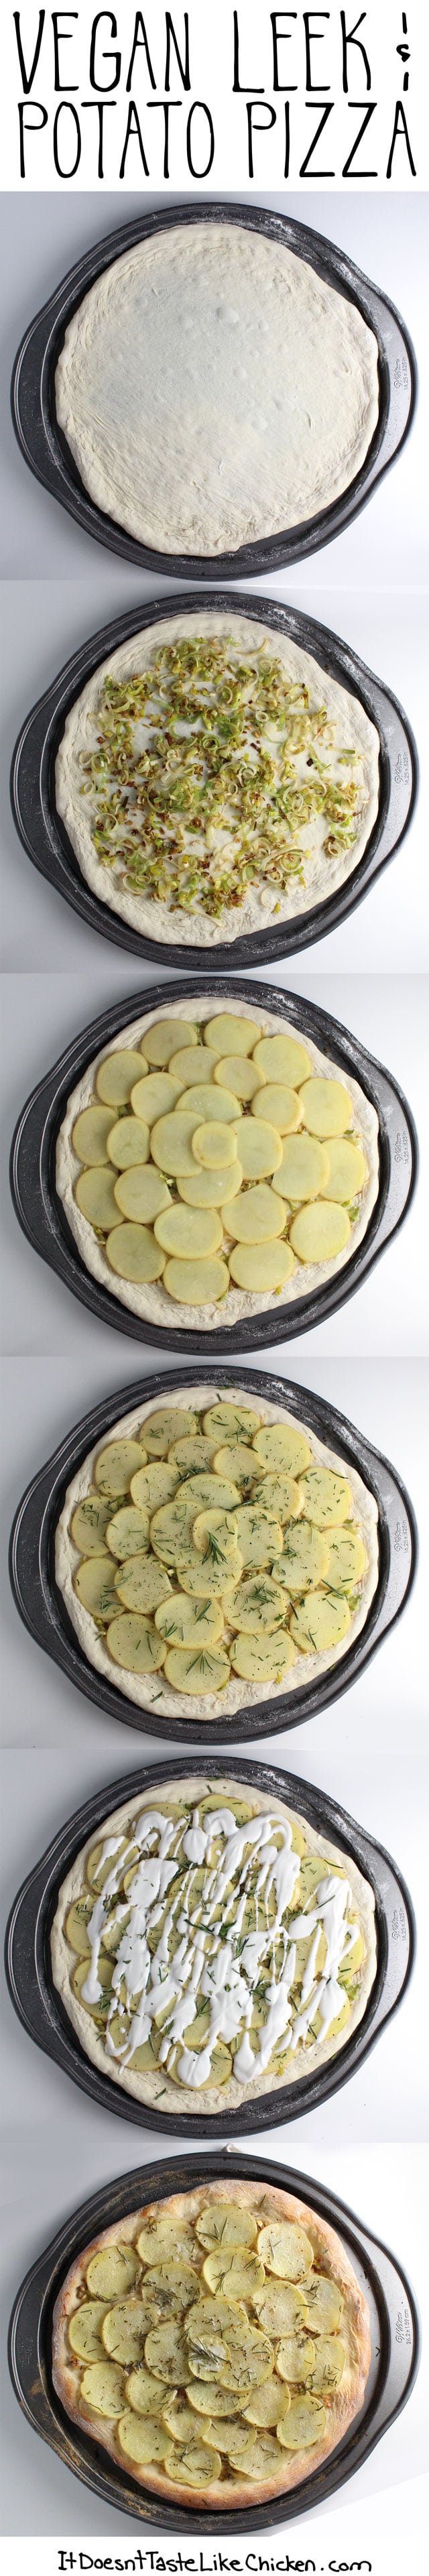 Vegan Leek & Potato Pizza! This pizza looks fancy but it is actually so easy to make. The layers of leek, potato, rosemary, and coconut milk make this pizza so flavourful and delicious. Perfect for an appetizer or the main dish. #itdoesnttastelikechicken